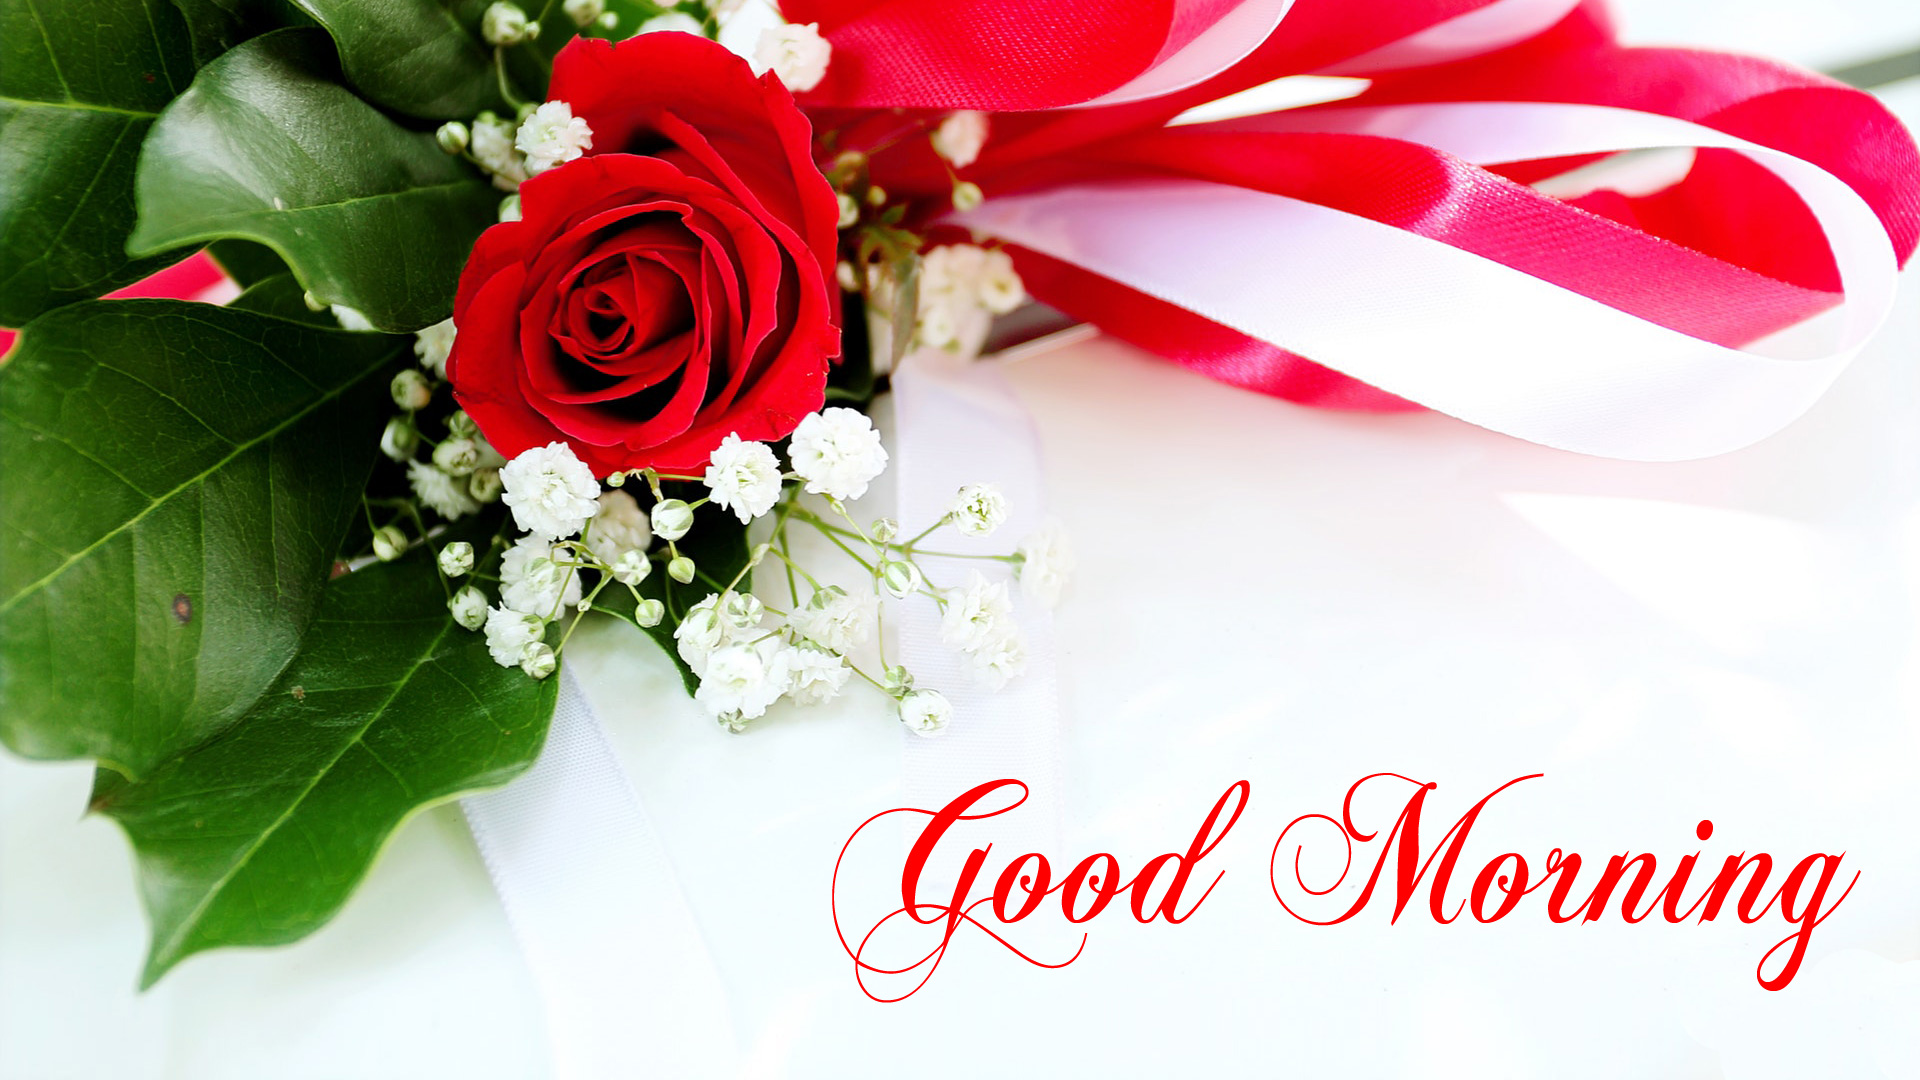 Good Morning Wallpaper with Flowers, Full HD 1920x1080 GM Images